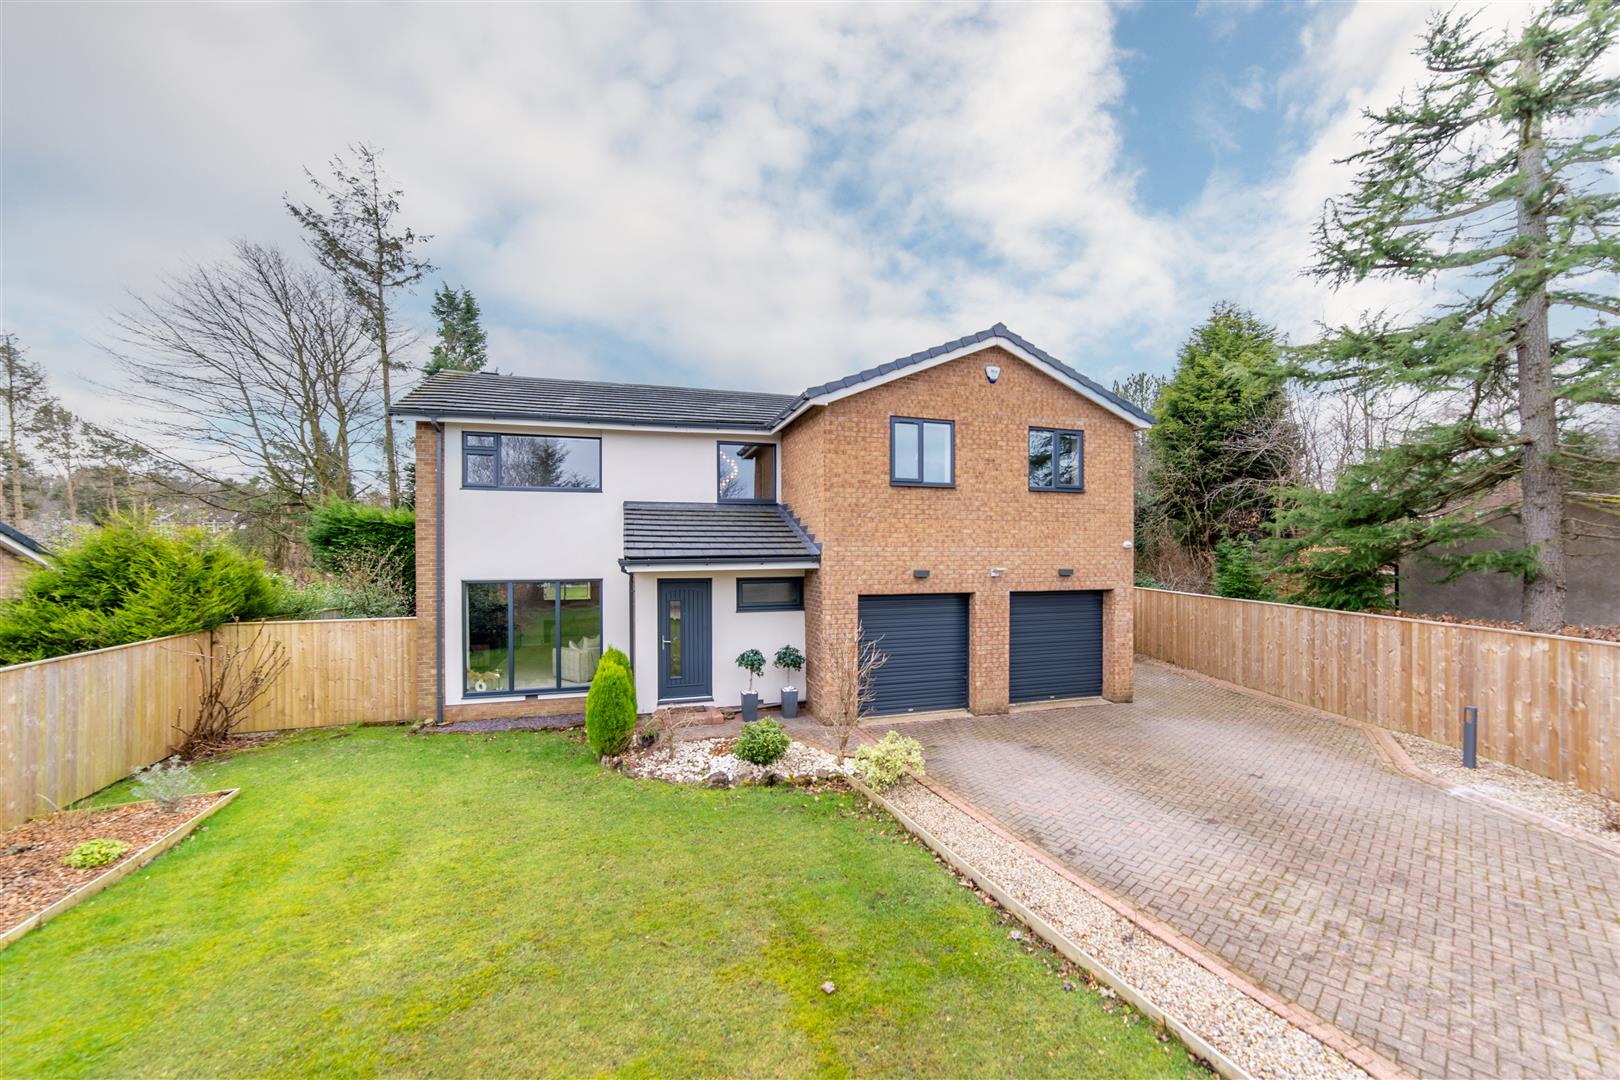 4 bed detached house for sale in Ashdale, Ponteland, NE20